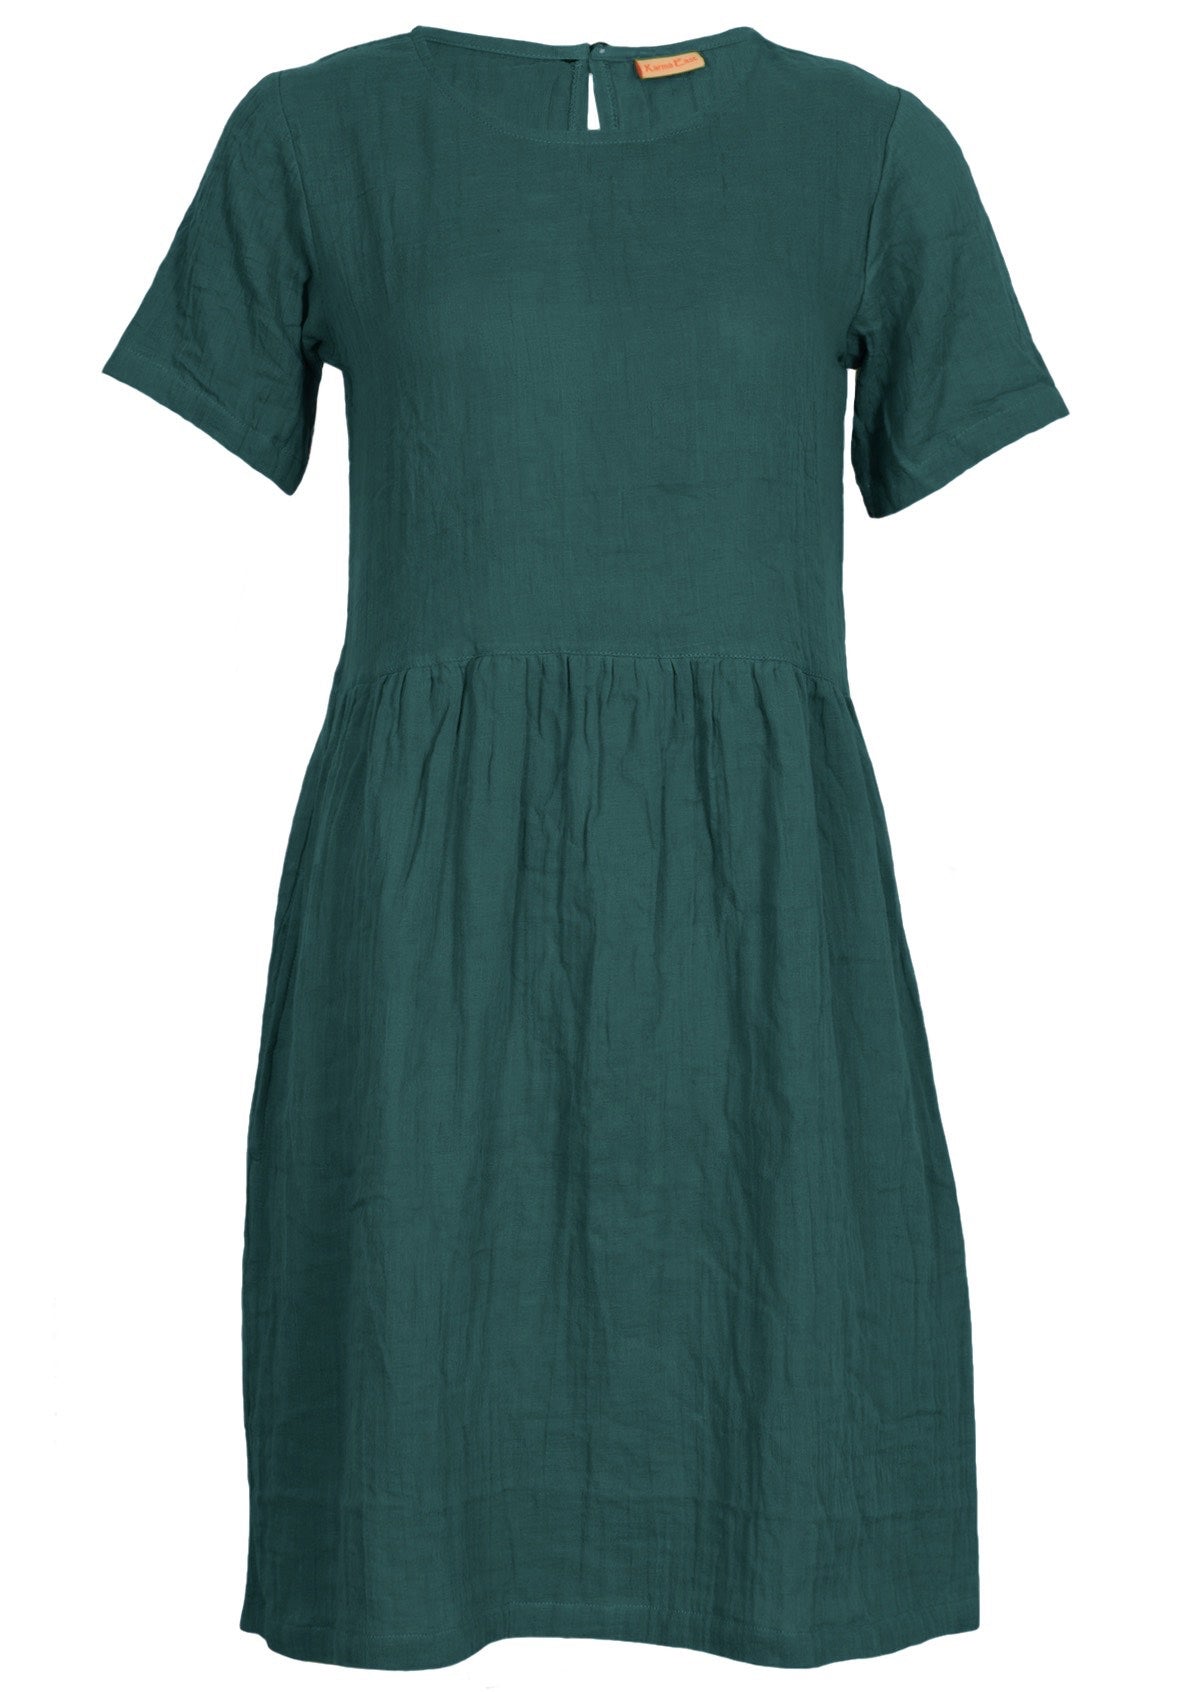 Deep teal double cotton short sleeve relaxed fit above the knee dress